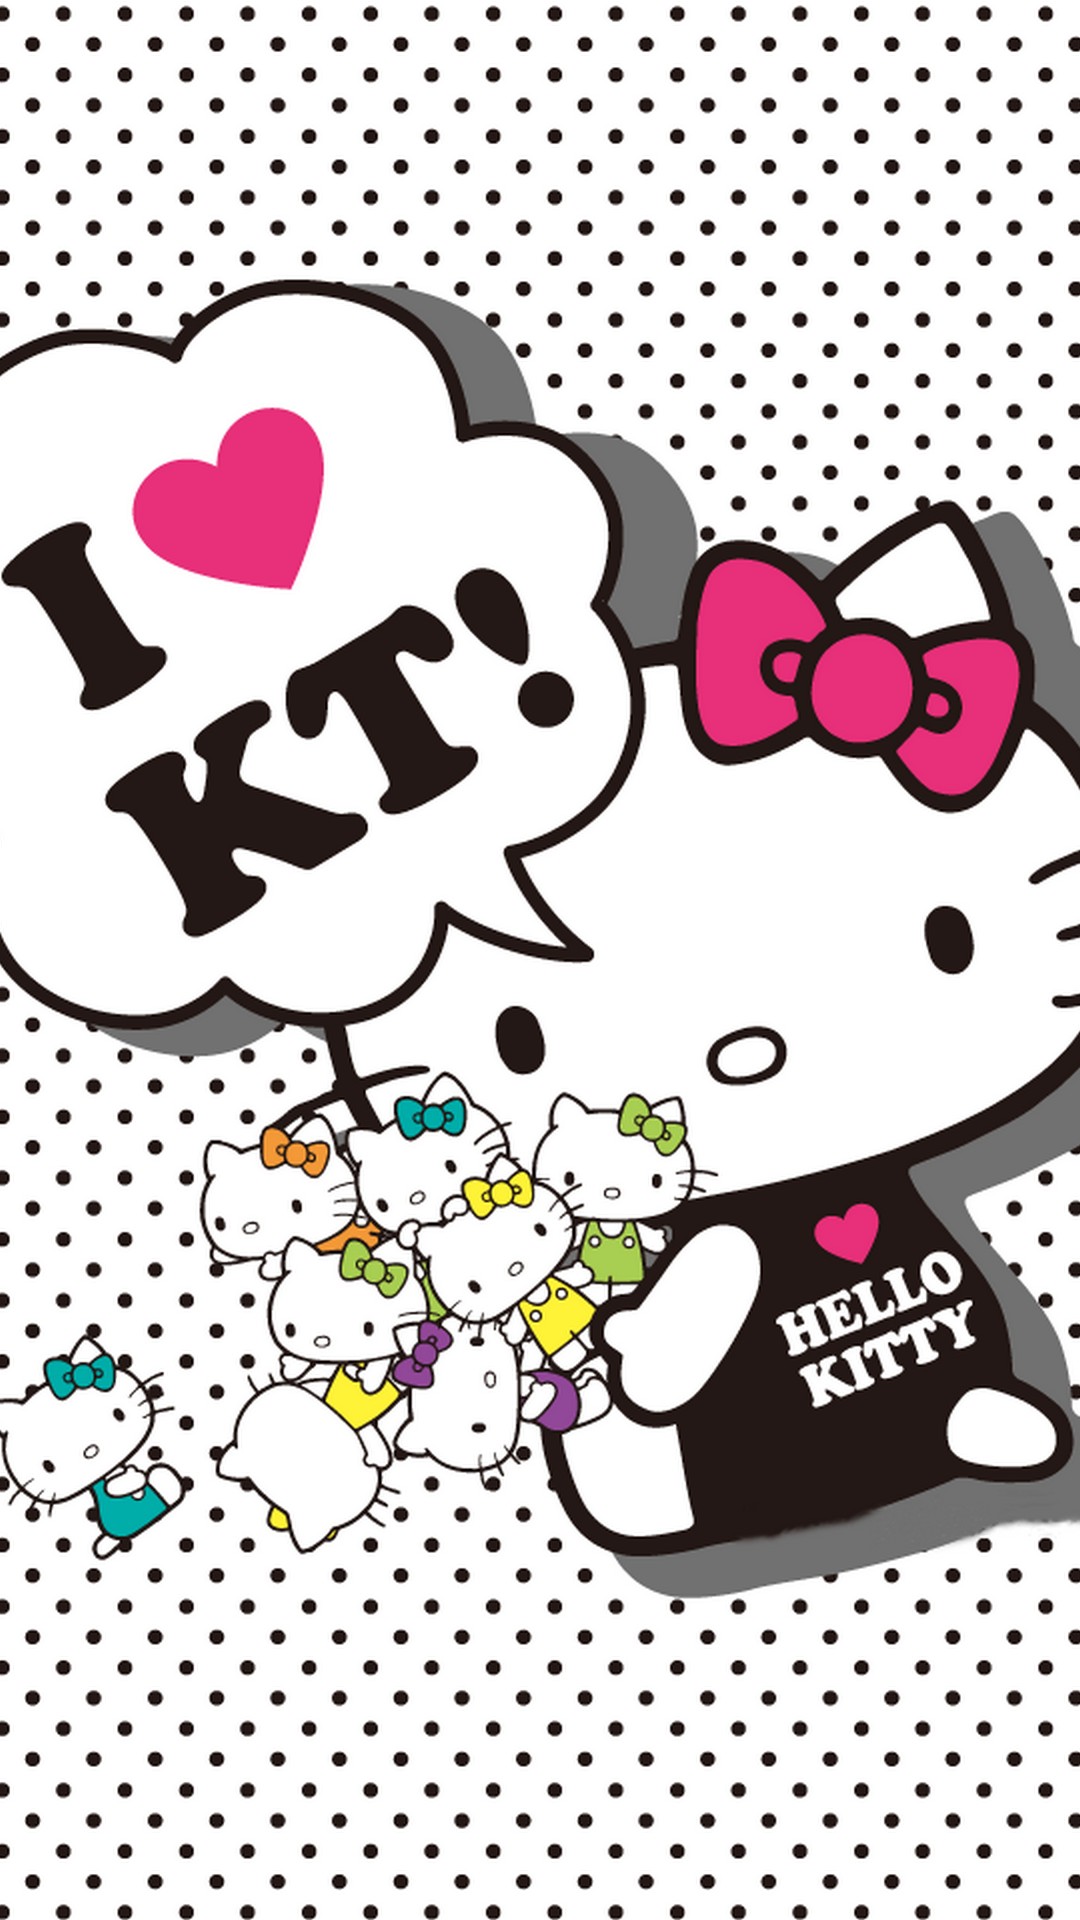 Hello Kitty HD Wallpapers For Mobile With Resolution 1080X1920 pixel. You can make this wallpaper for your Desktop Computer Backgrounds, Mac Wallpapers, Android Lock screen or iPhone Screensavers